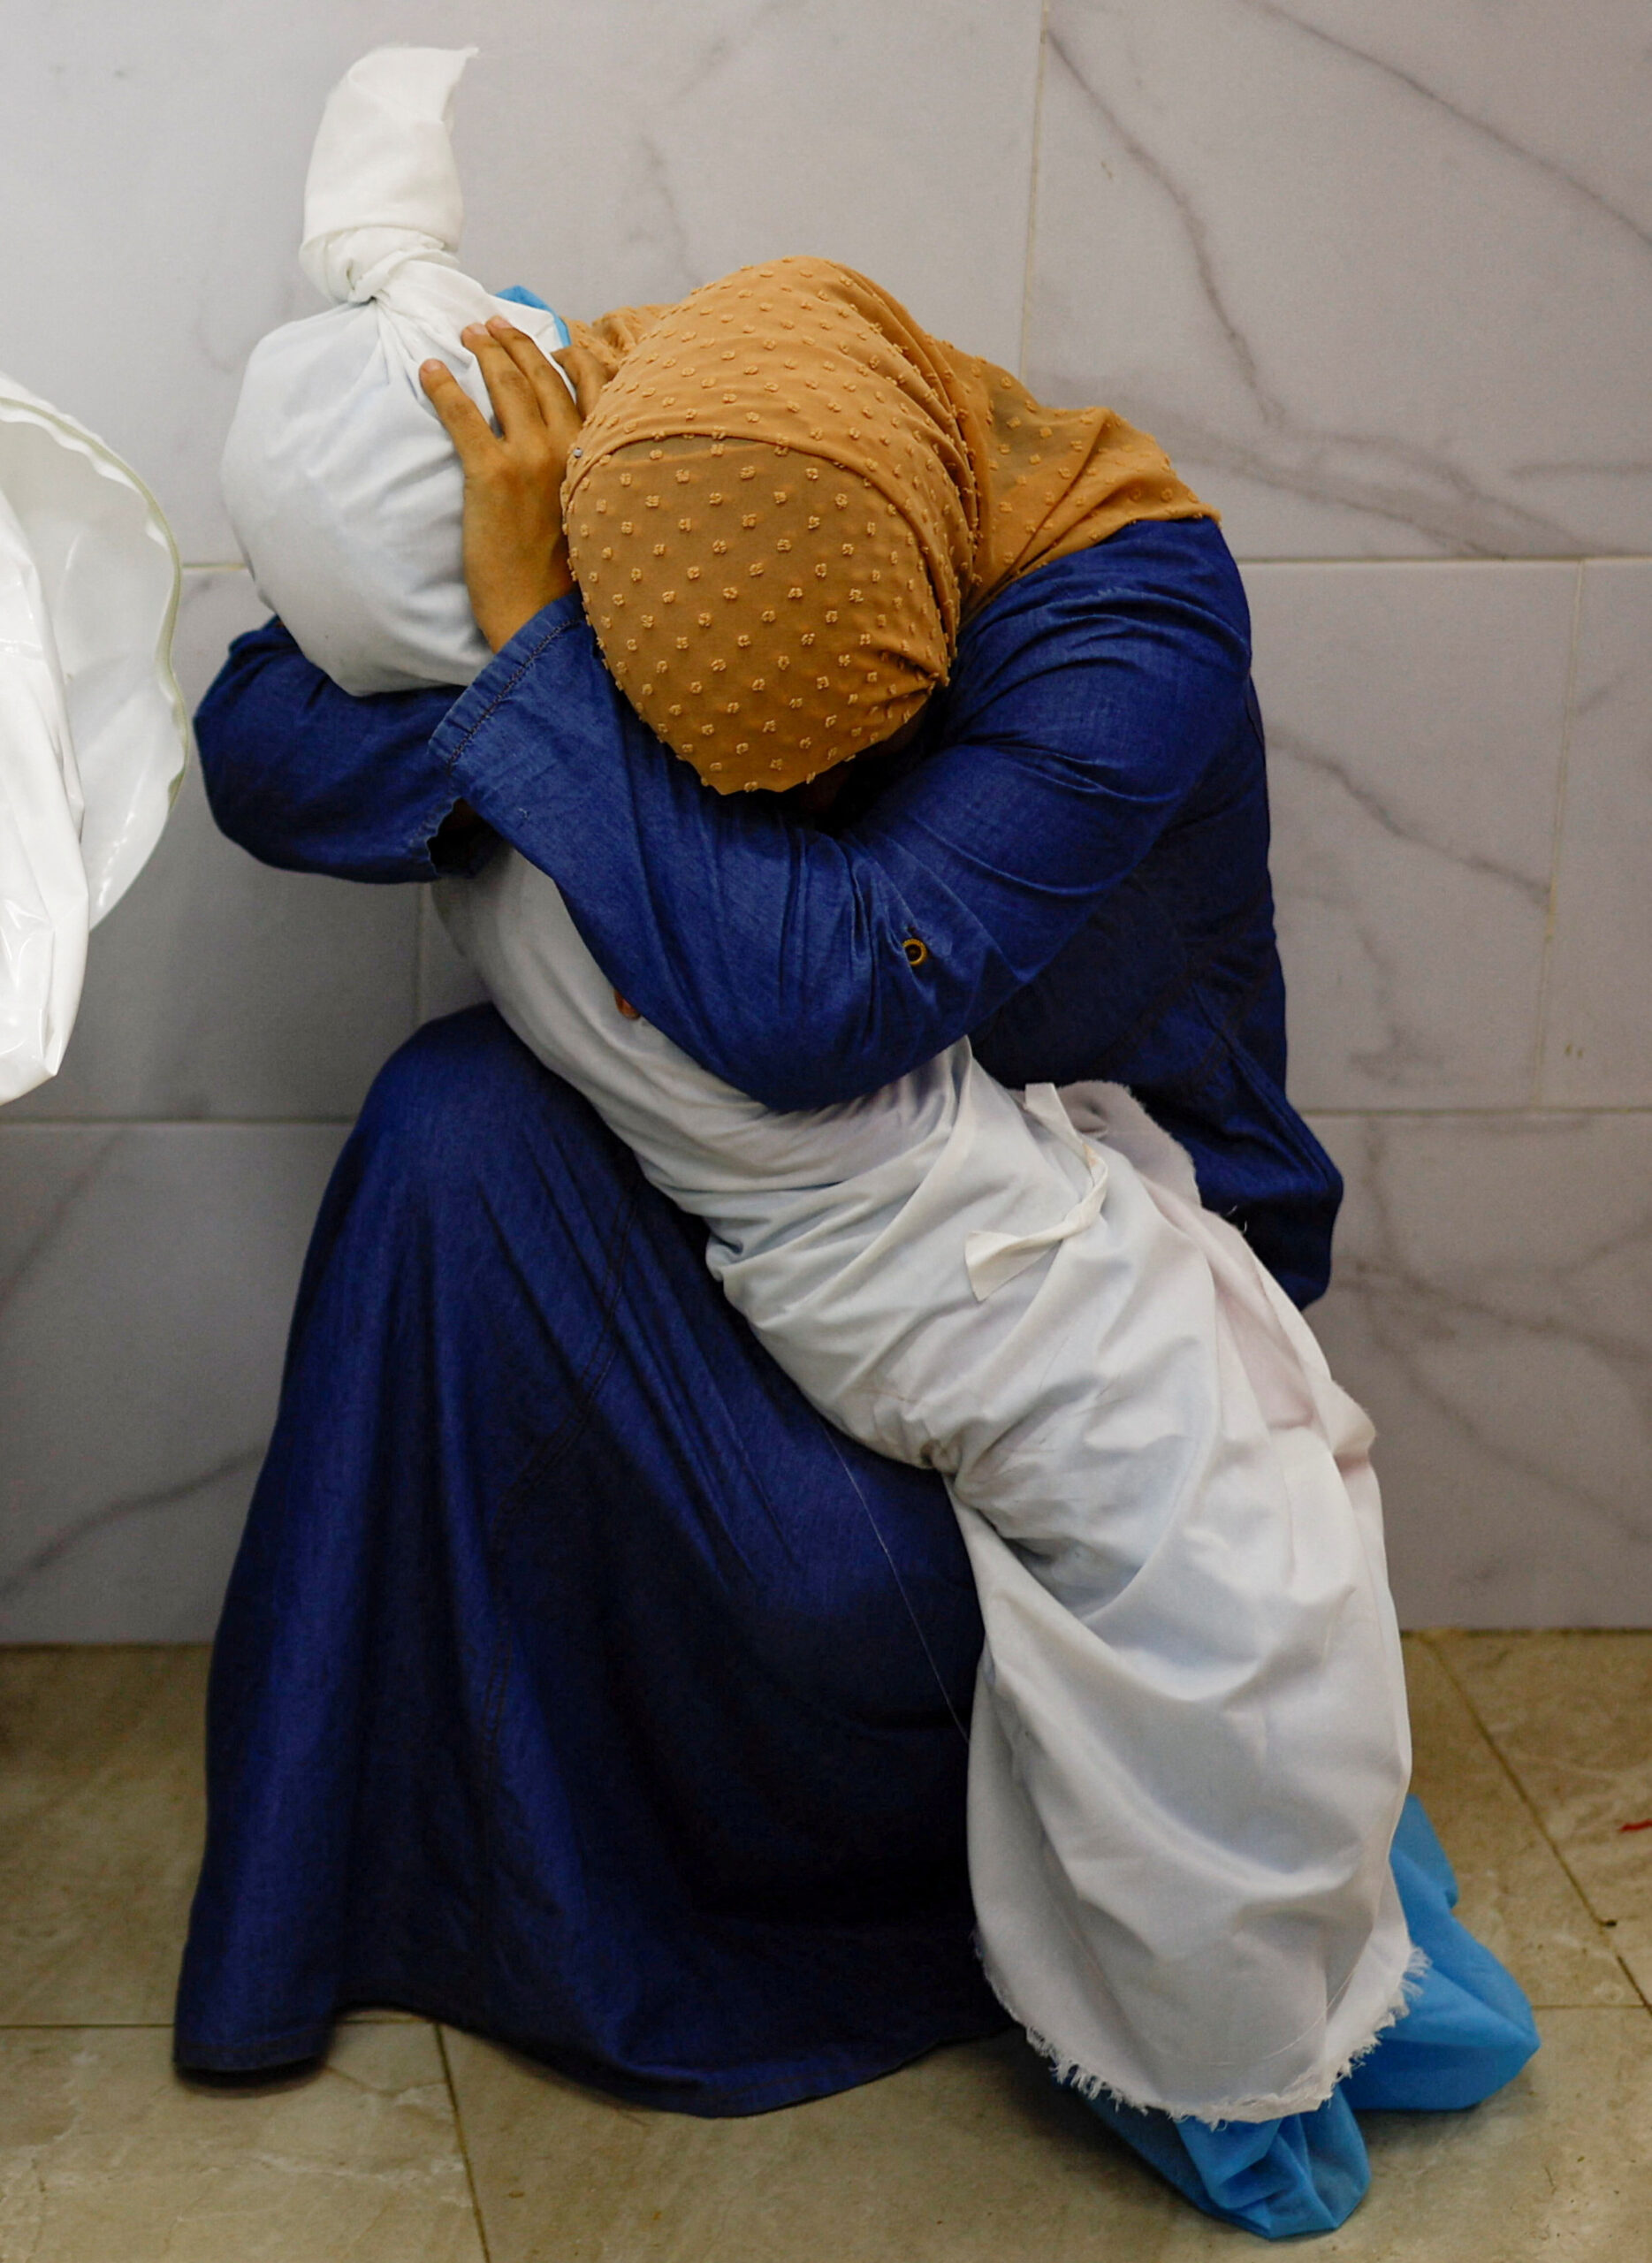 Chatting the Pictures: Mourning Embrace in a Gaza Hospital